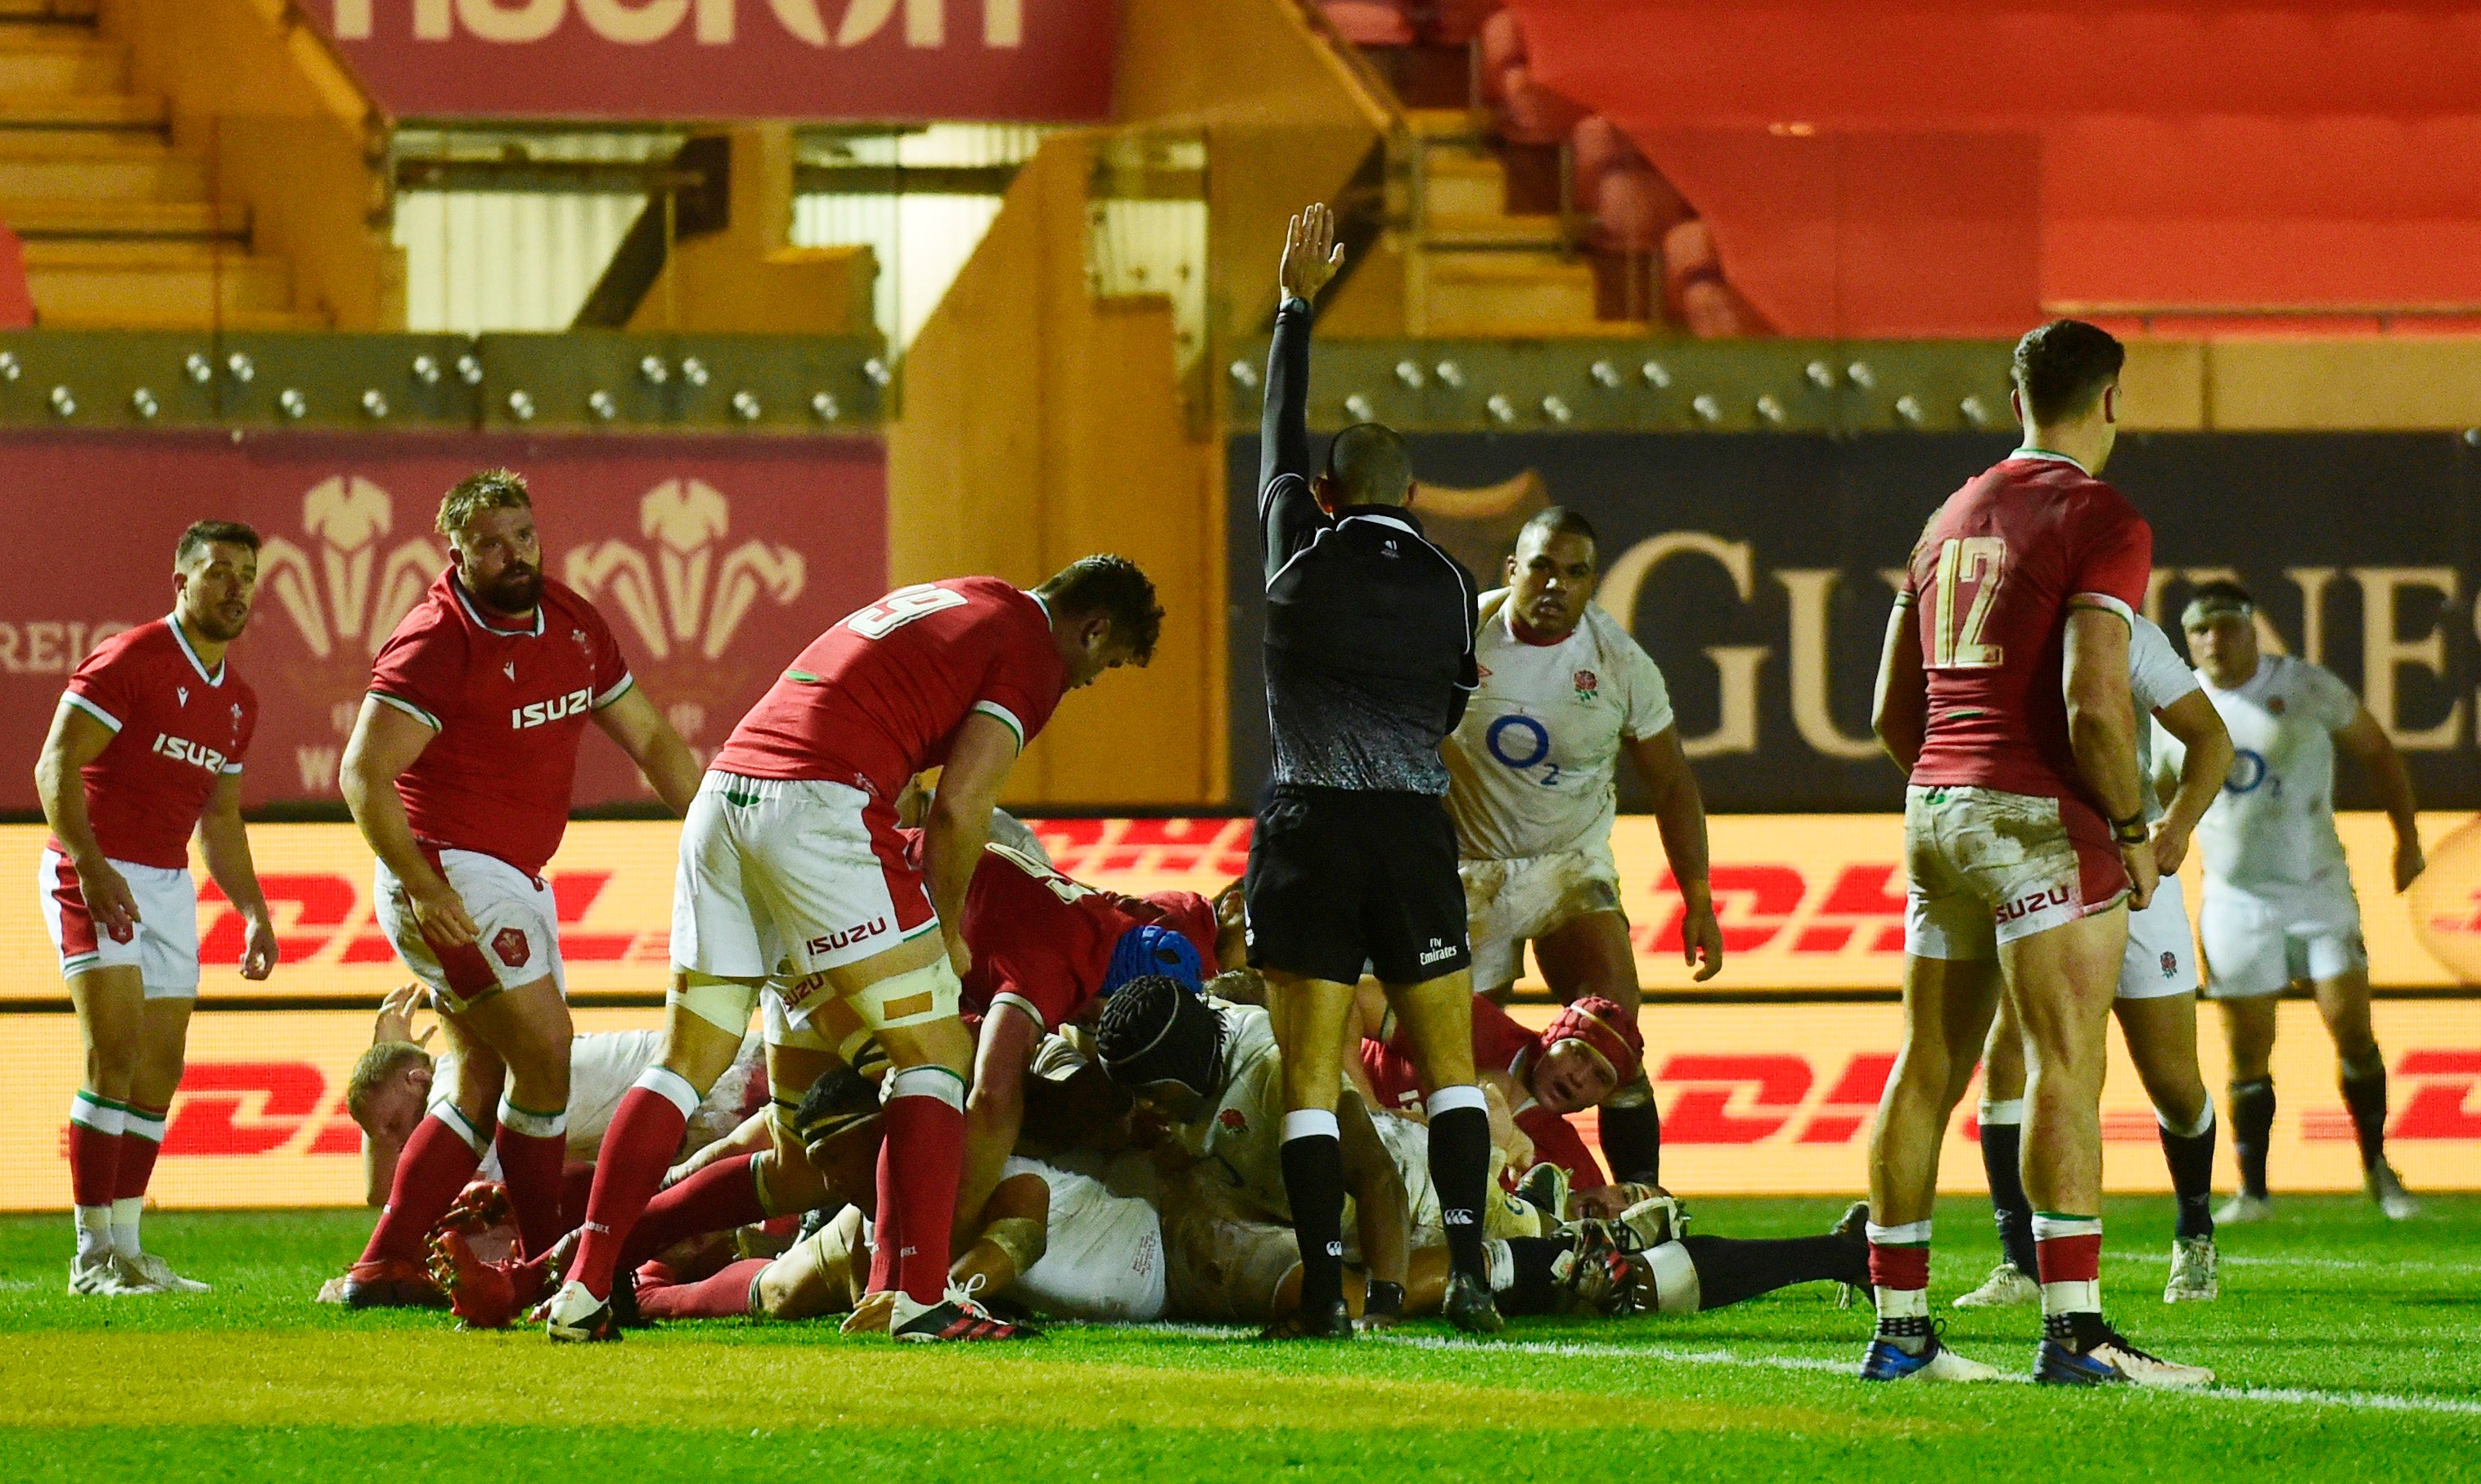 Mako Vunipola’s second-half try proved too much for Wales to come back from